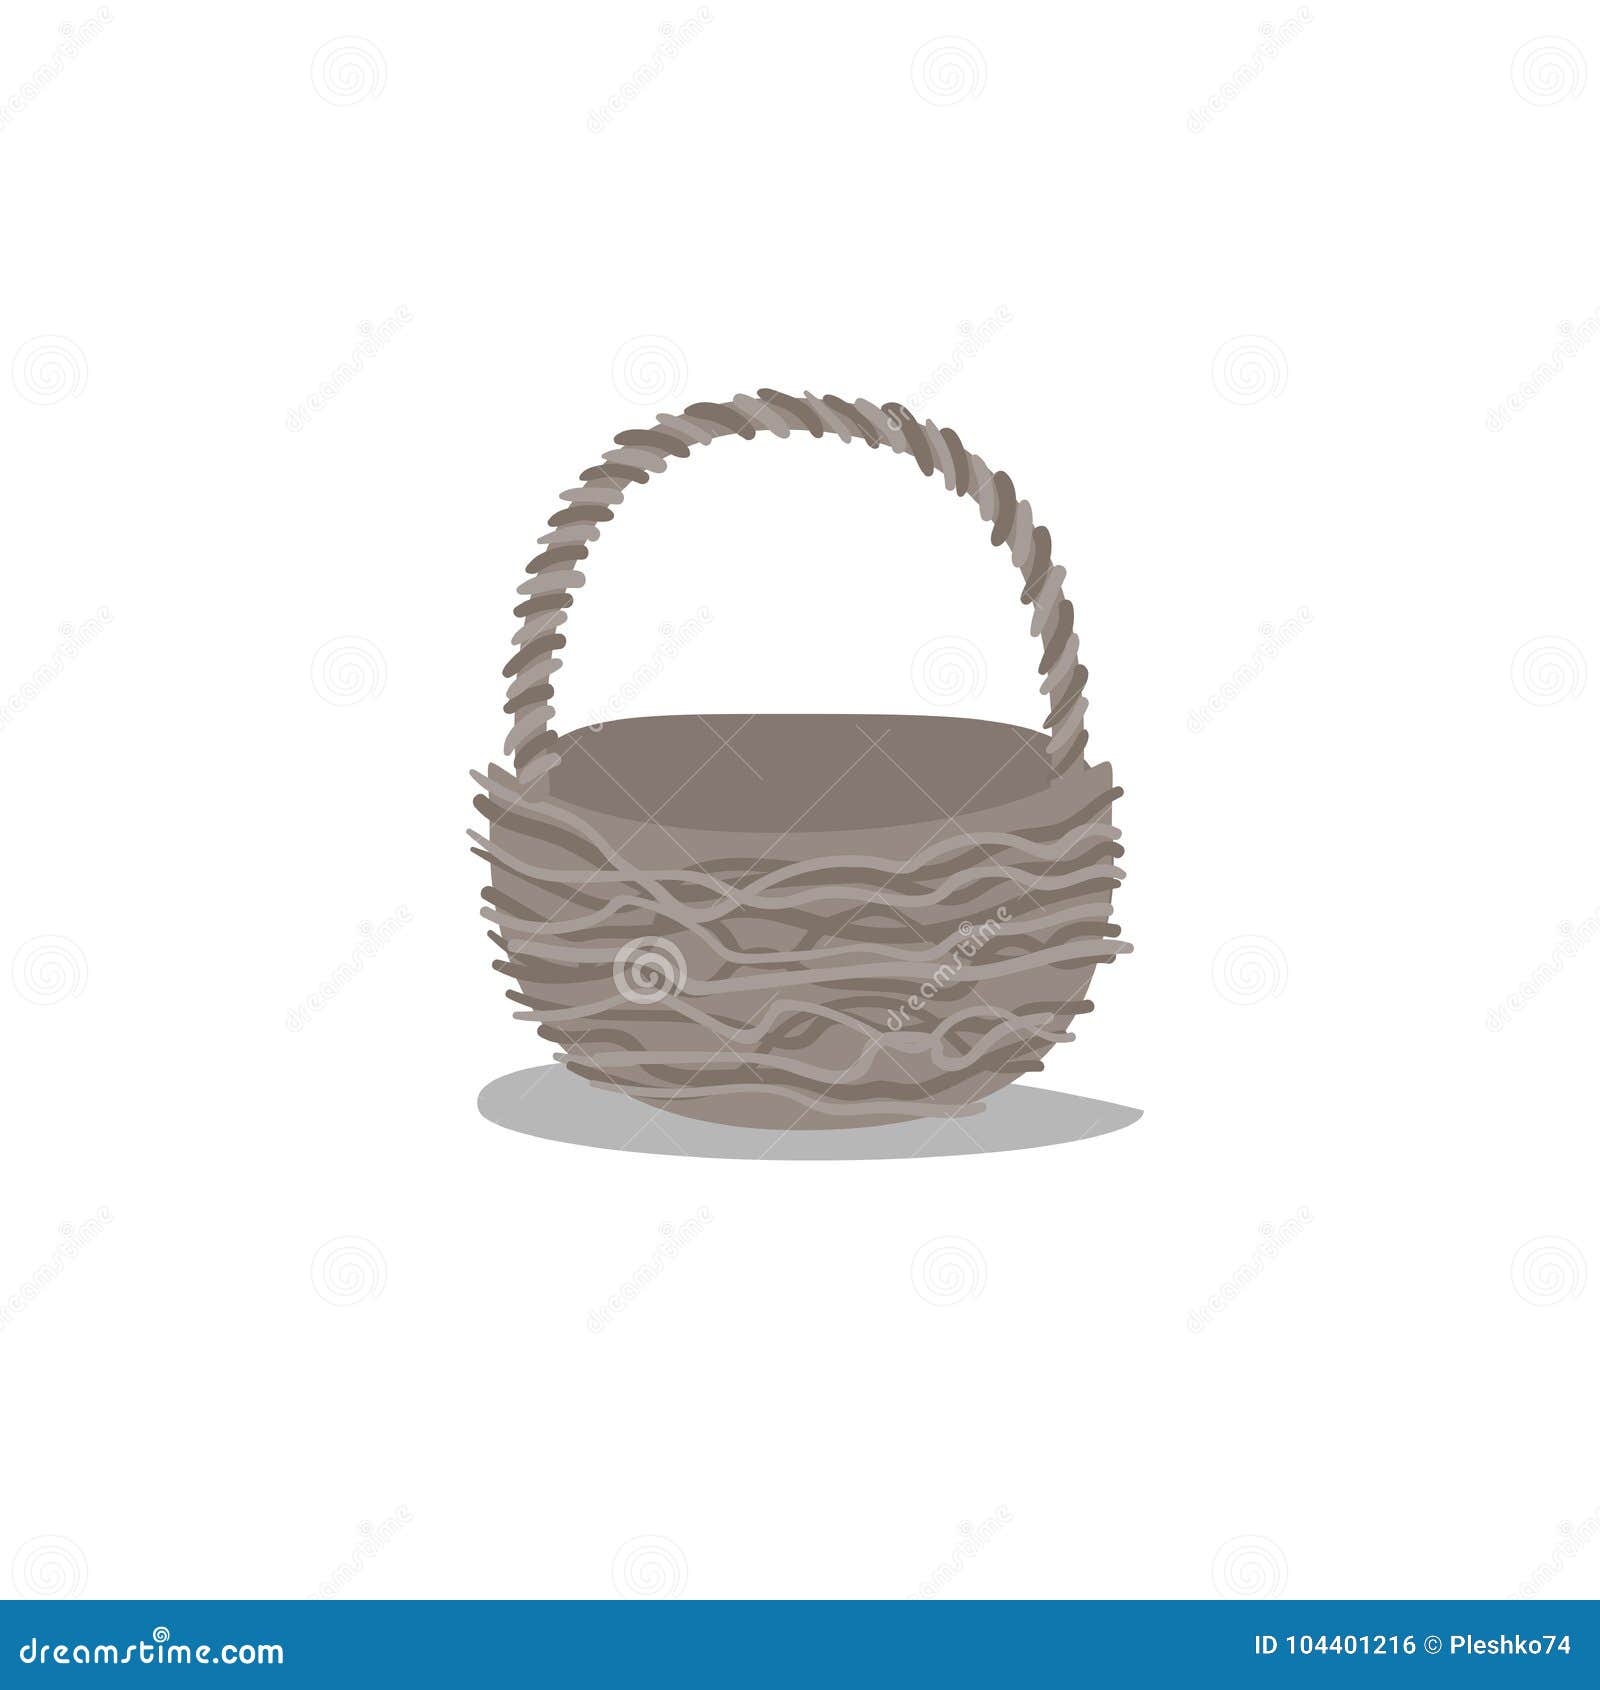 Cartoon Trendy Design Empty Basket. Decorative Vector Illustration Icon.  Picnic and Easter Simple Flat Symbol Stock Vector - Illustration of nature,  cane: 104401216